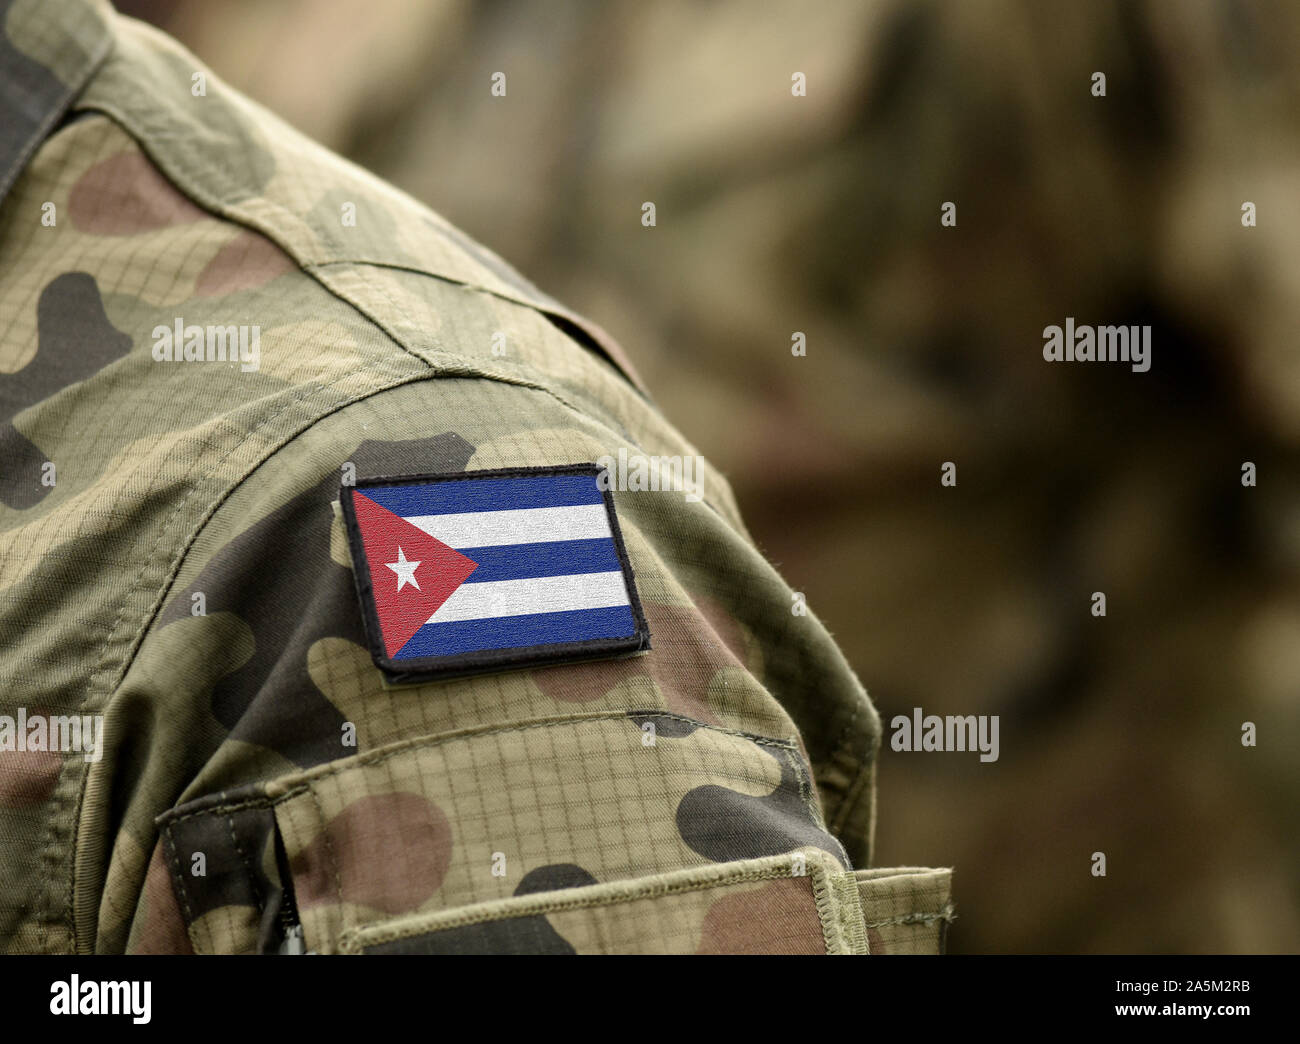 Flag of Cuba on military uniform. Army, troops, soldier (collage). Stock Photo